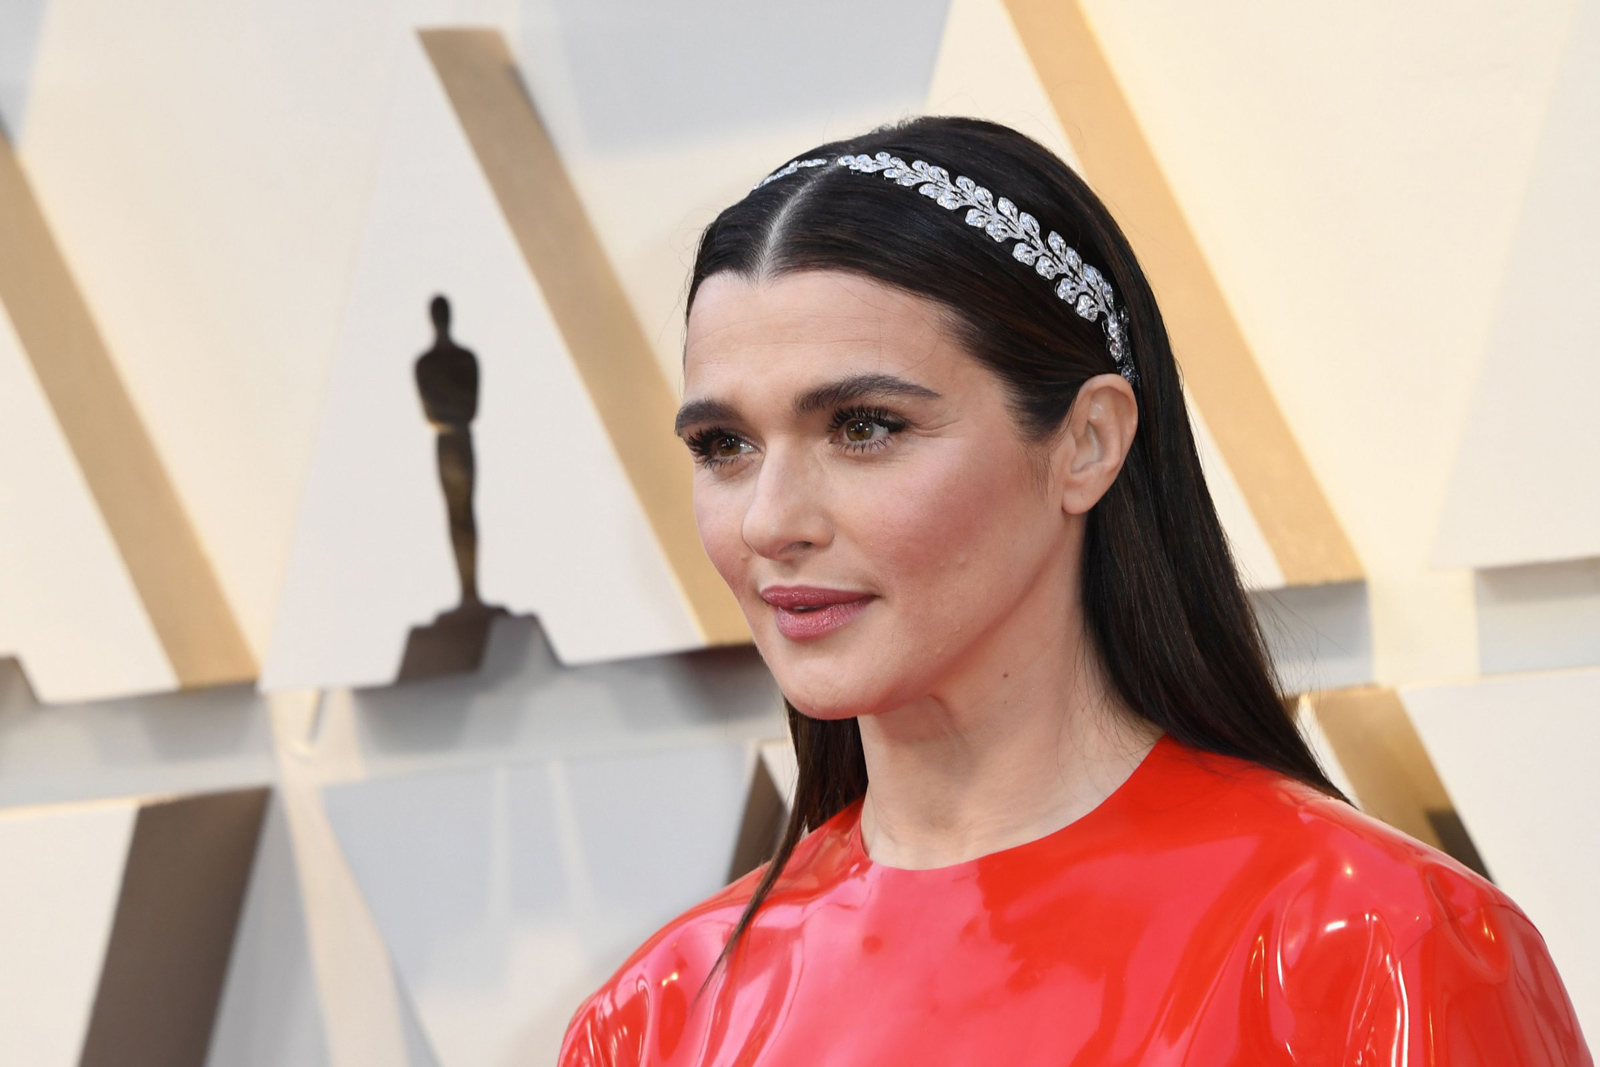 Rachel Weisz wearing Cartier Archive Collection antique laurel leaf style diamond and platinum brooches as a headband